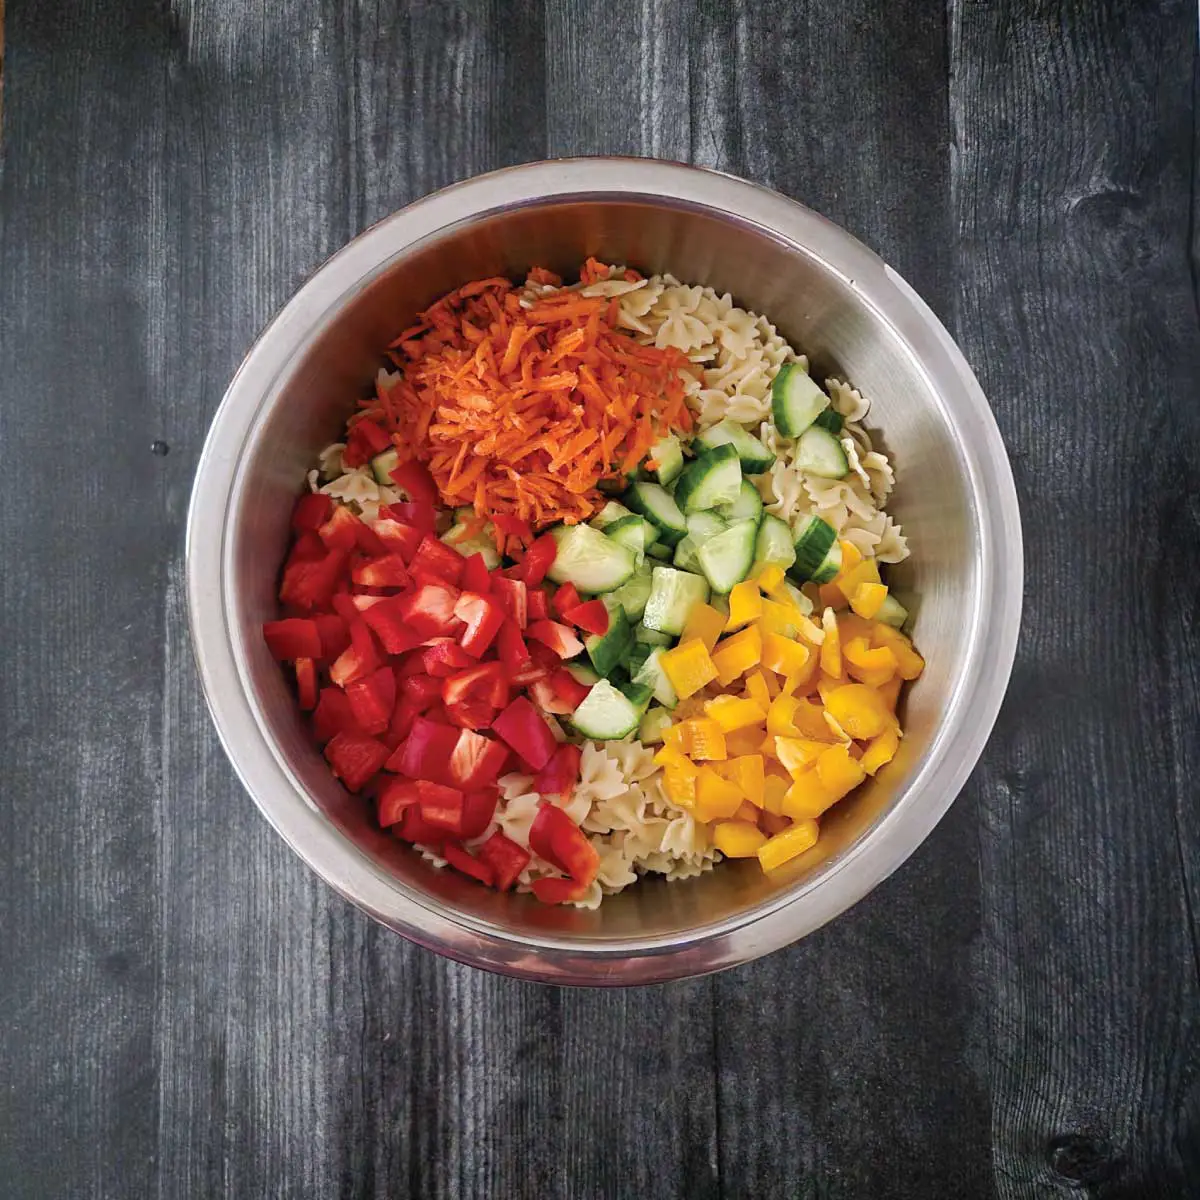 Noodles in a large mixing bowl with chopped red and yellow peppers, cucumbers and shredded carrot on top ready to be mixed.